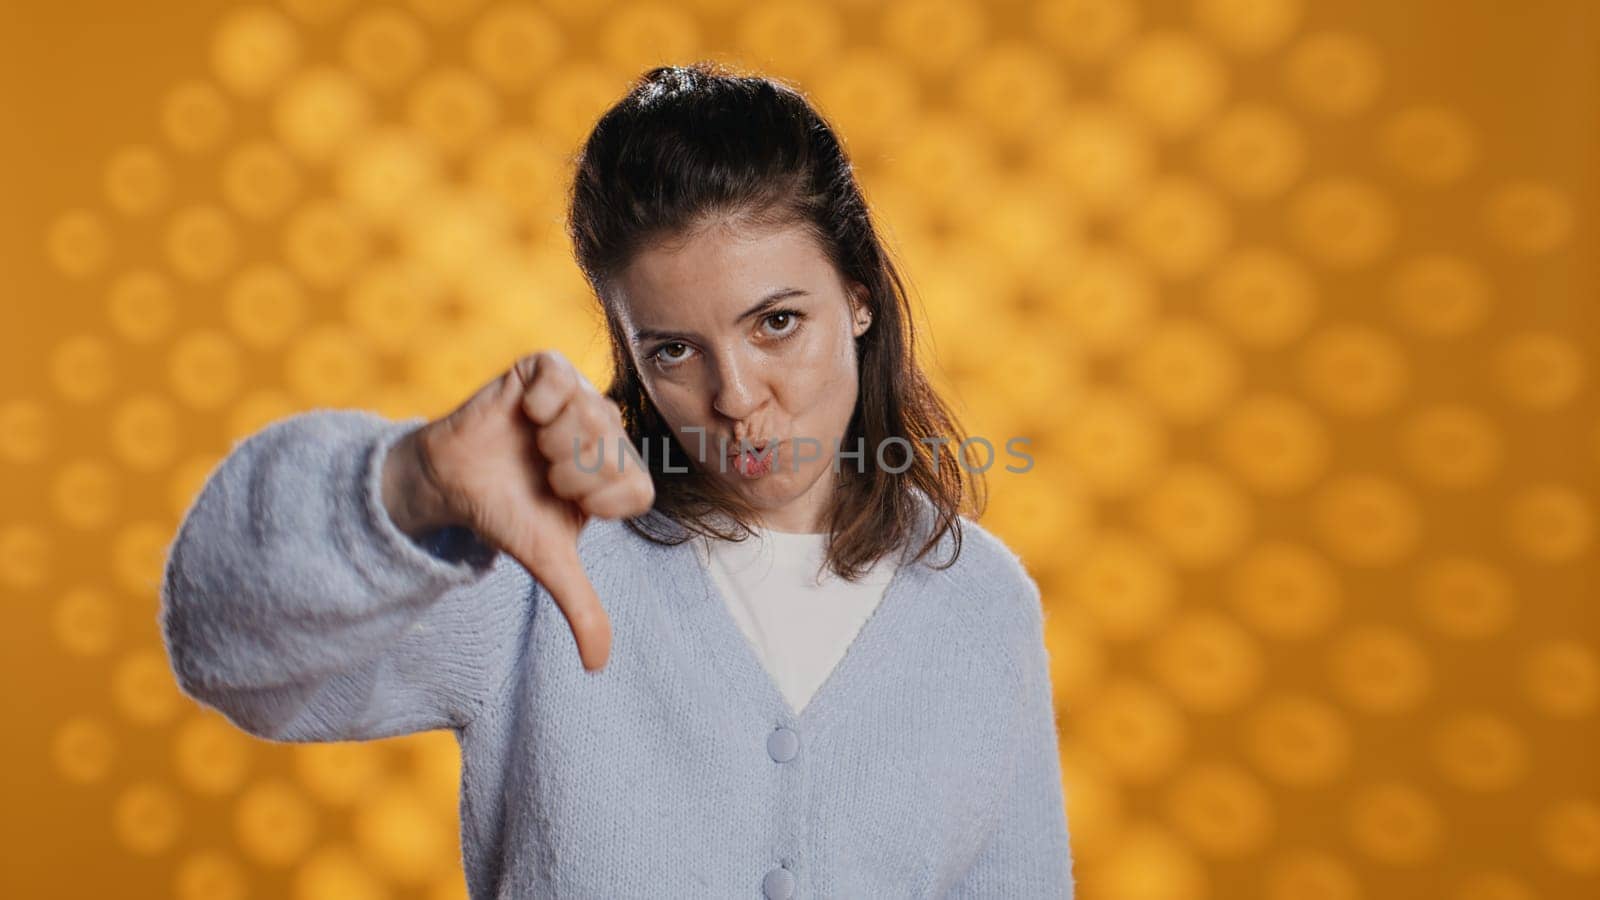 Disappointed woman bashing book, showing thumbs down sign, studio background by DCStudio